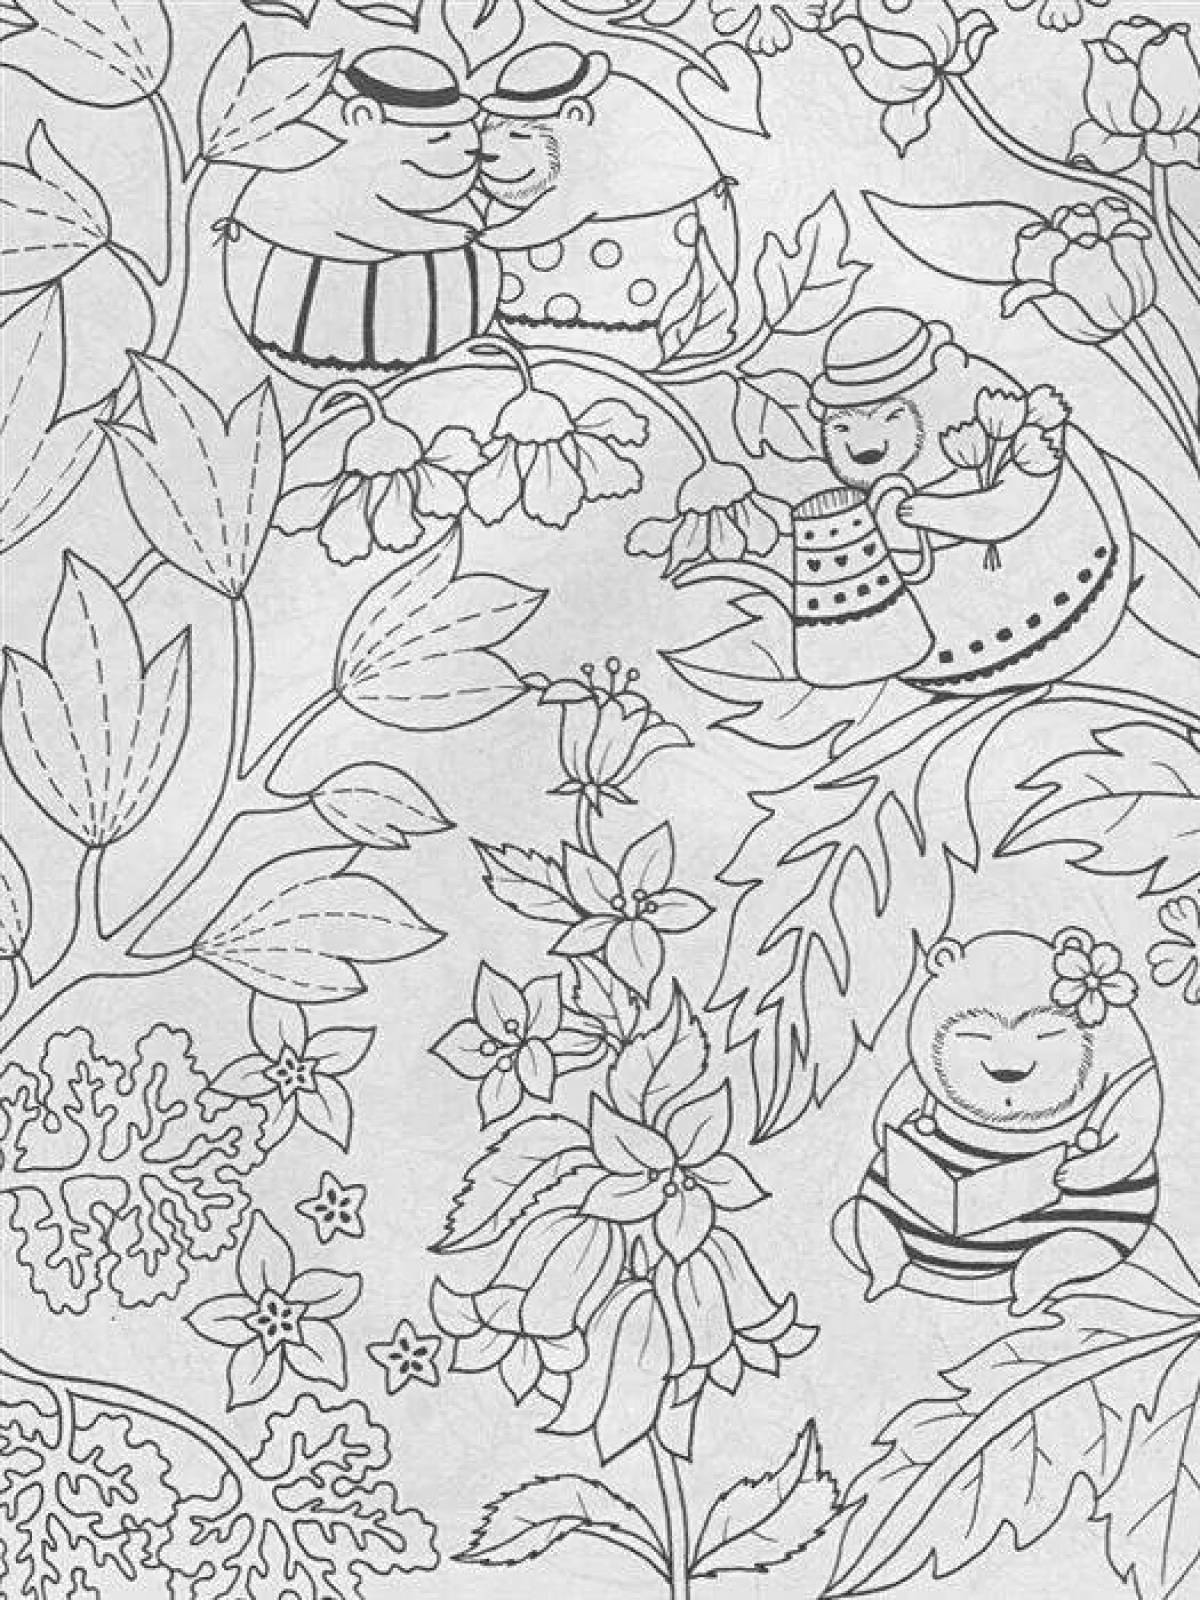 Million bears coloring book